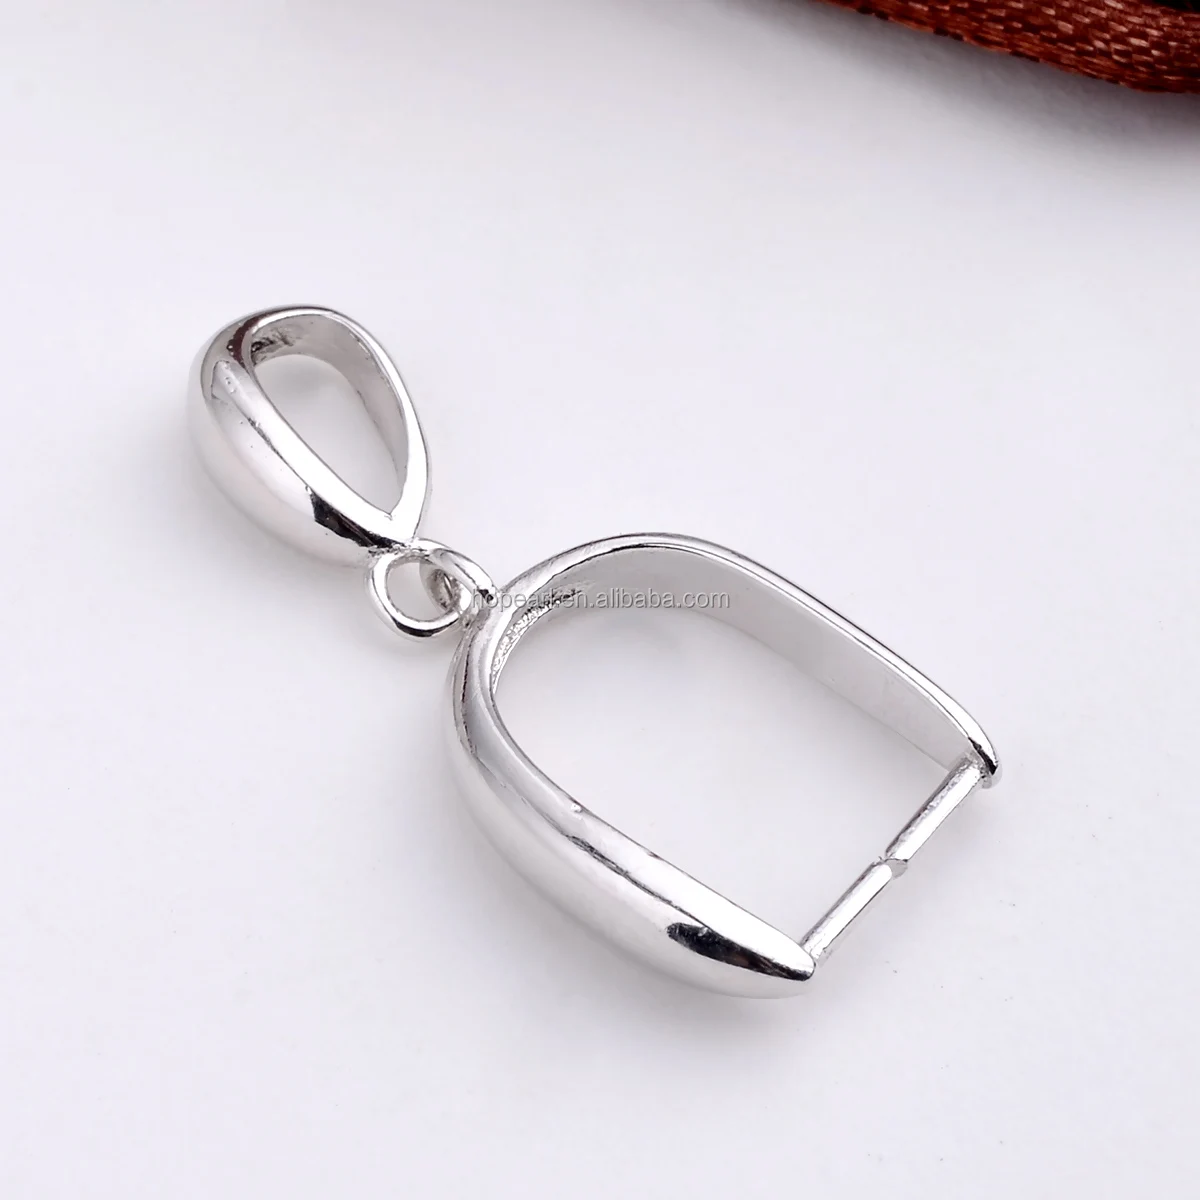 

SSP238 Pendant Bail 925 Sterling Silver Pinch Clip Bail Connector for Jewelry Making Bead Pendant